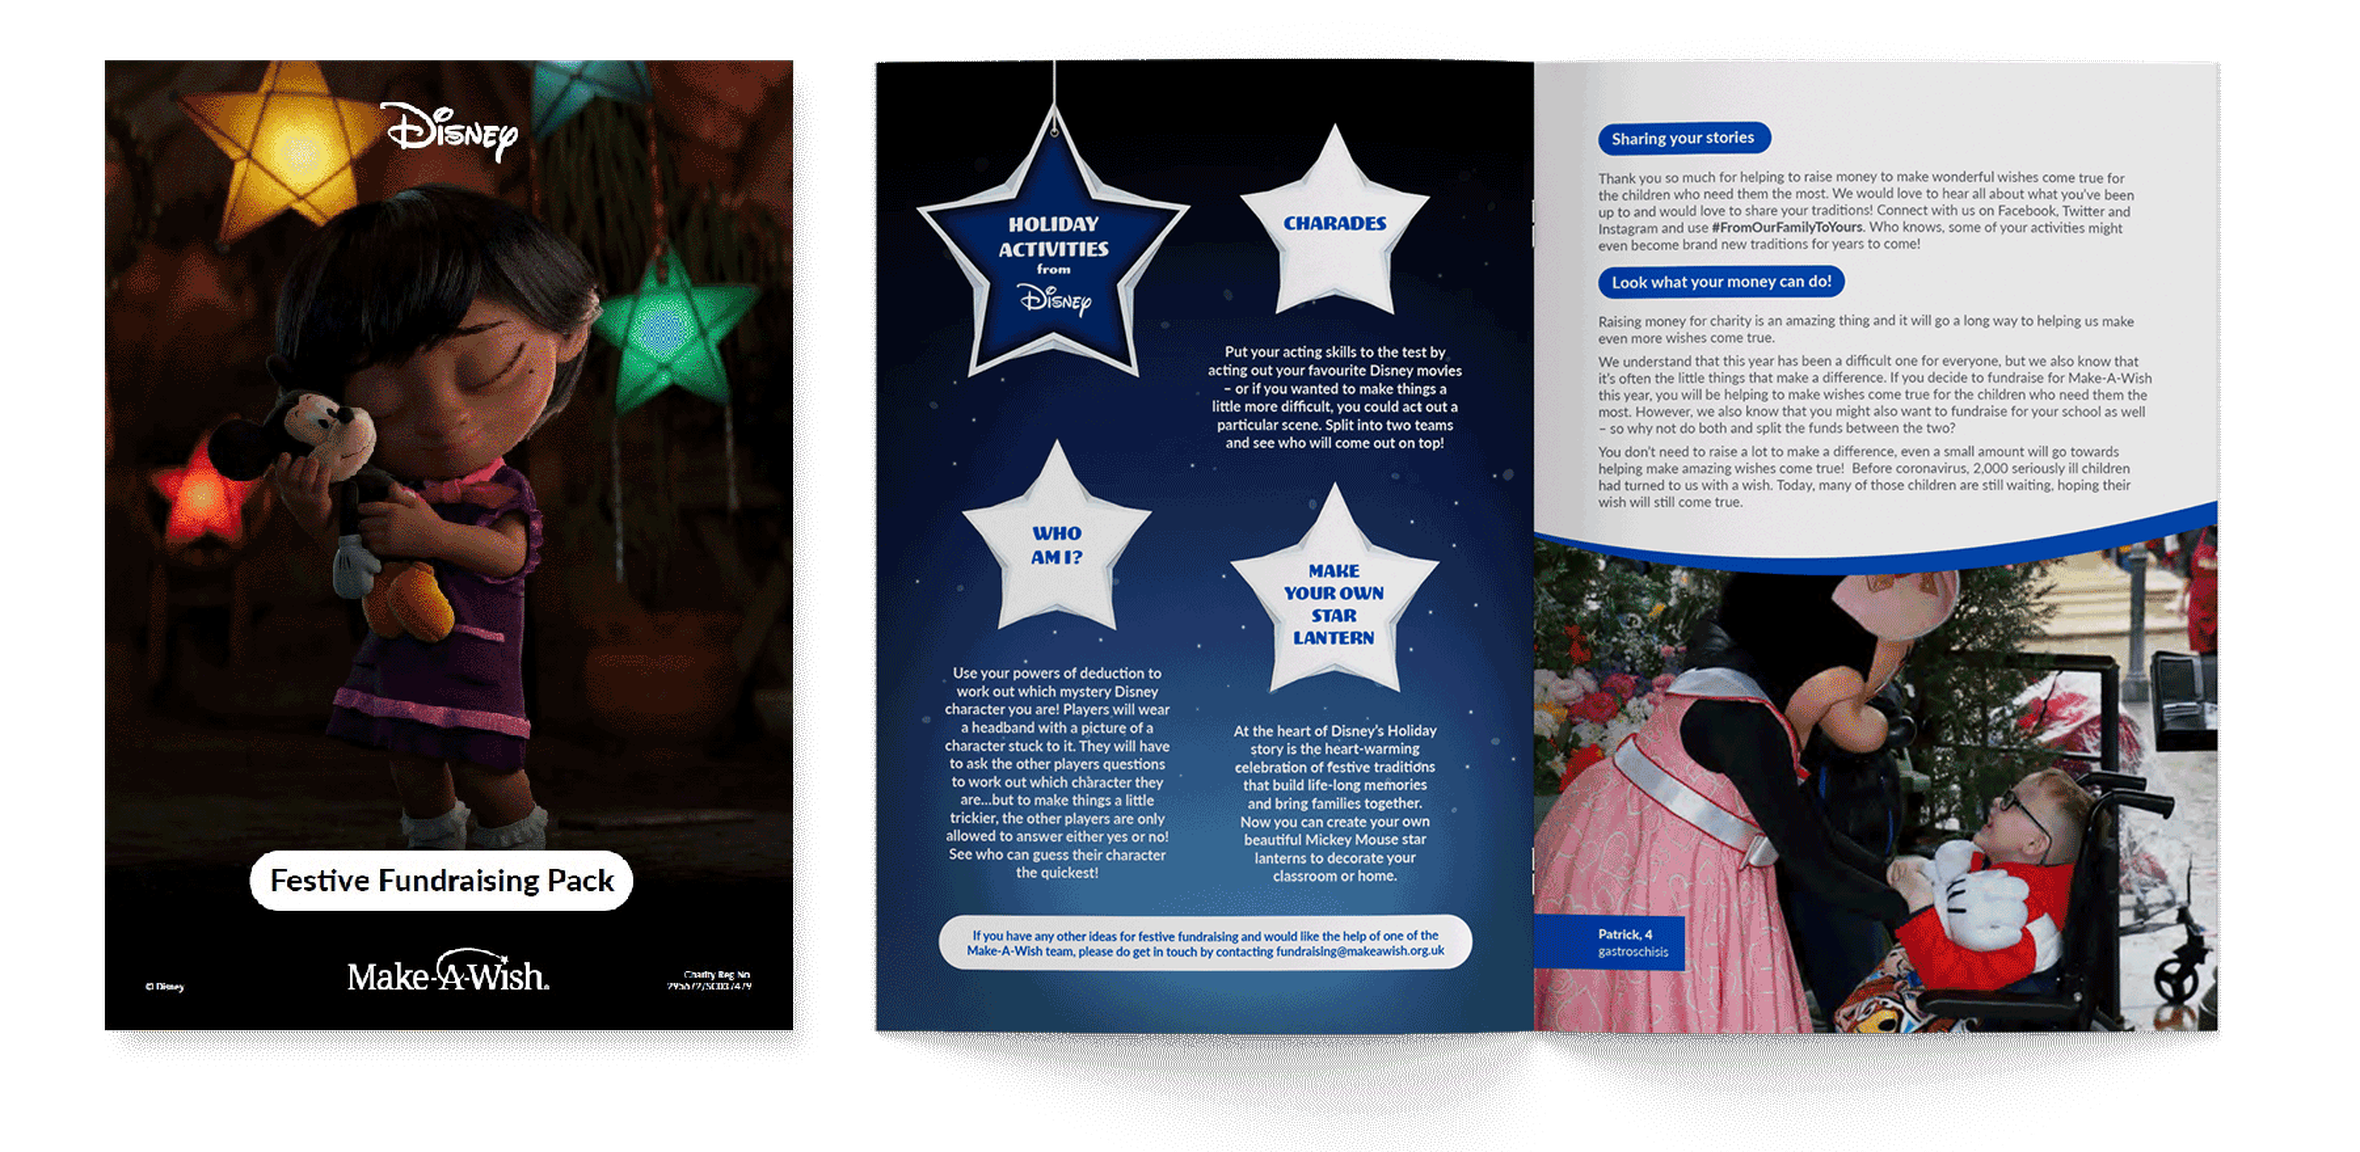 The Disney fundraising pack, which is available to download now.